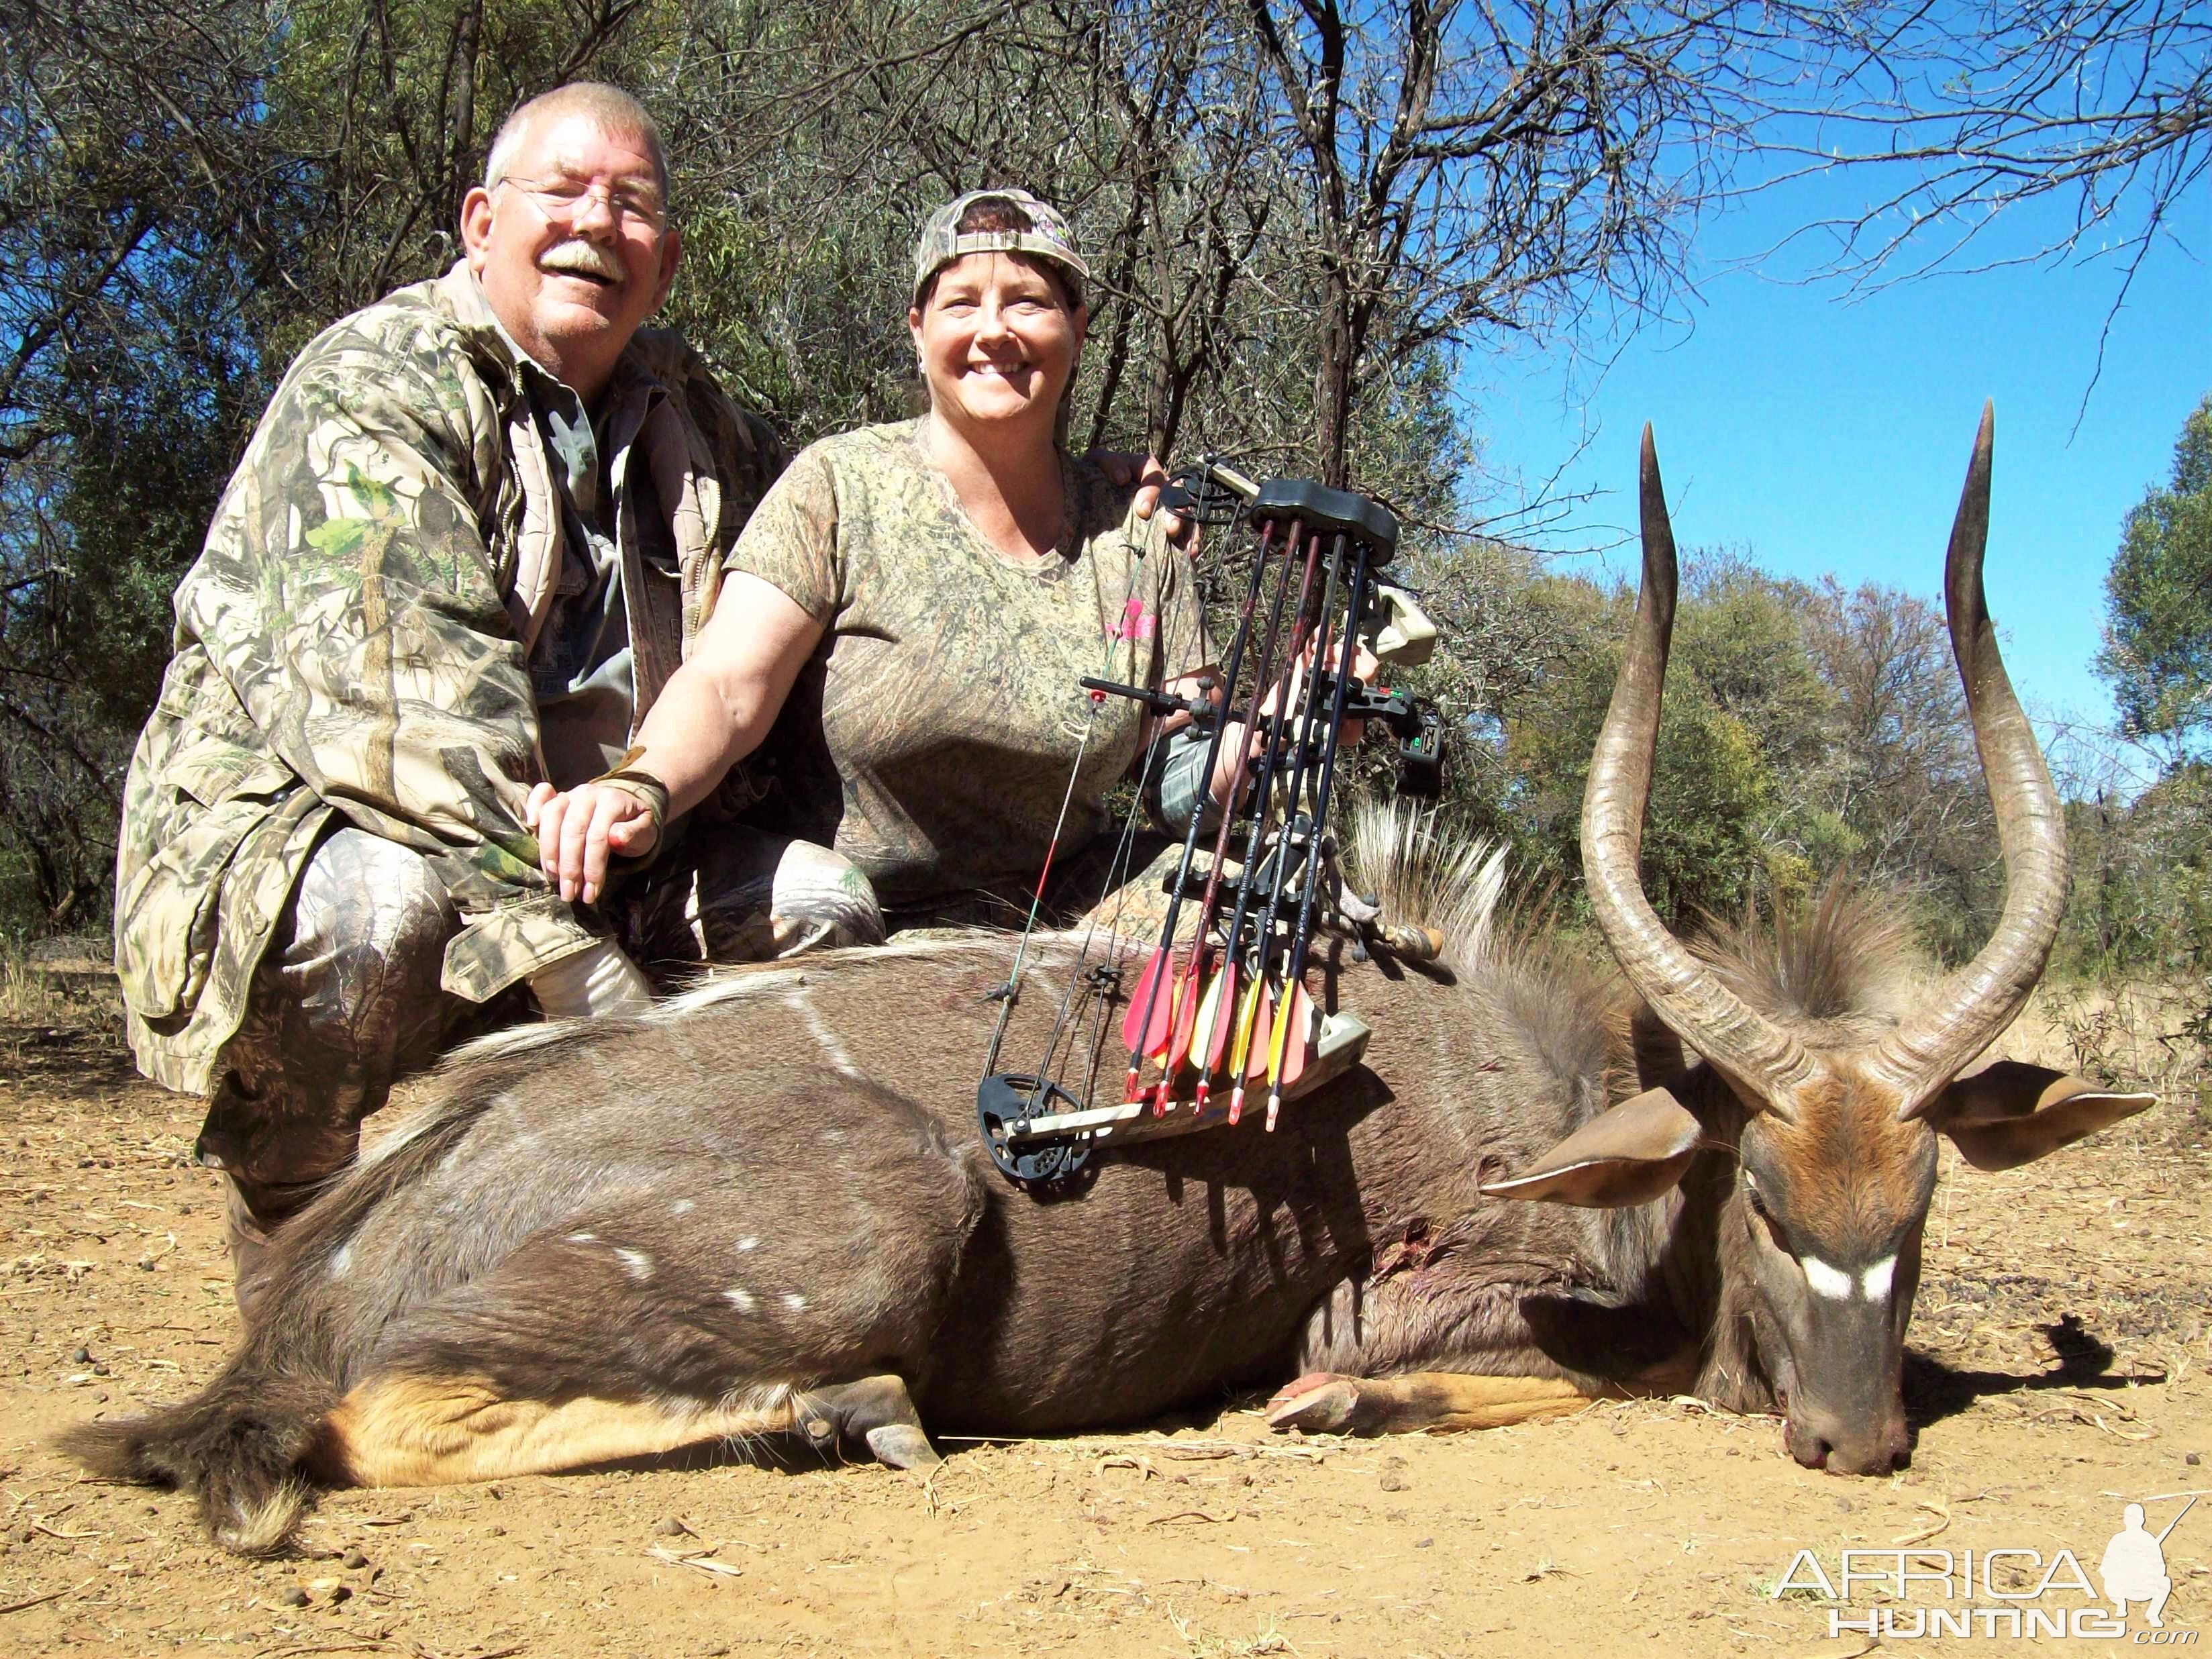 Bow Hunt Nyala in South Africa